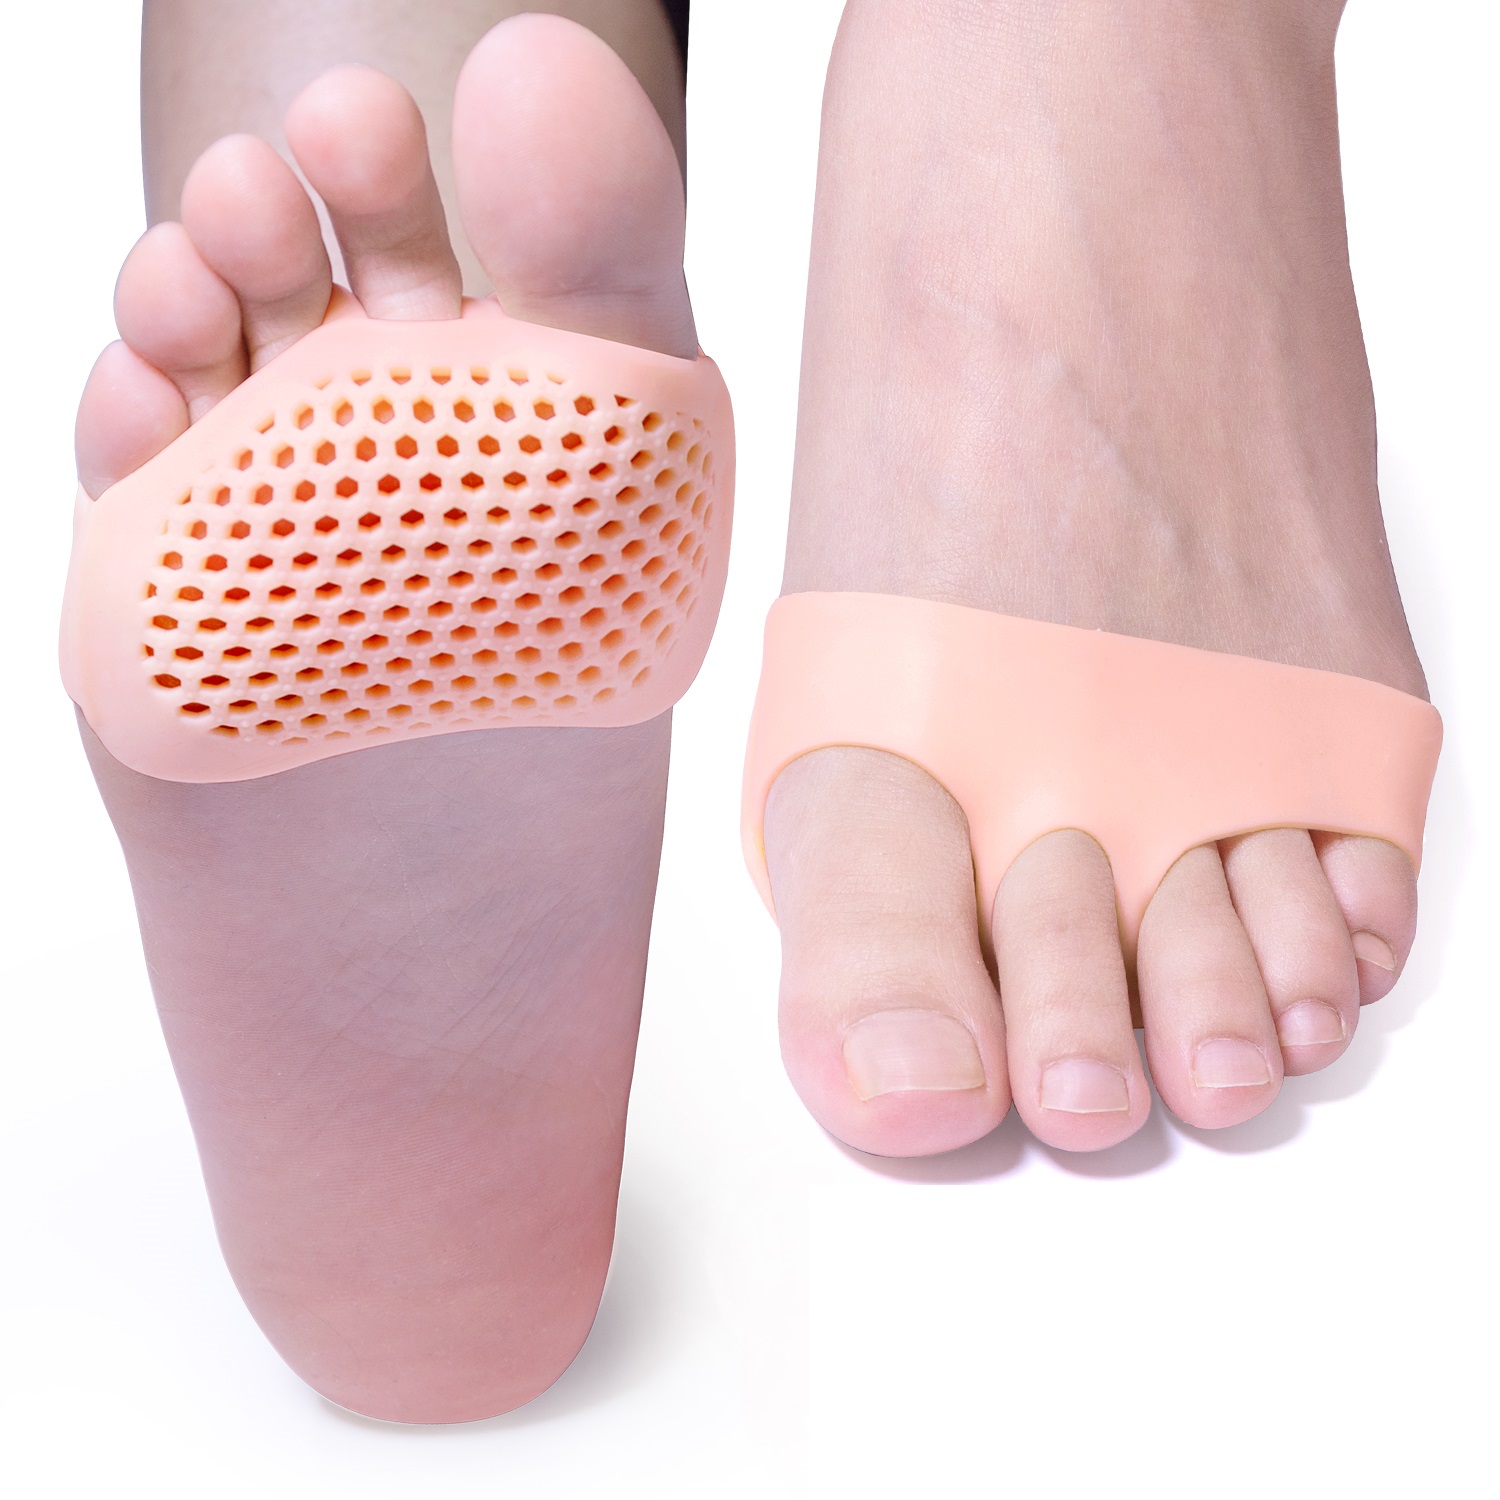 

6pcs Breathable Sofe Foot Forefoot Pads Silicone Gel Foot Cushion Insoles Prevent Corn Callus Blisters Foot Care For Men Women